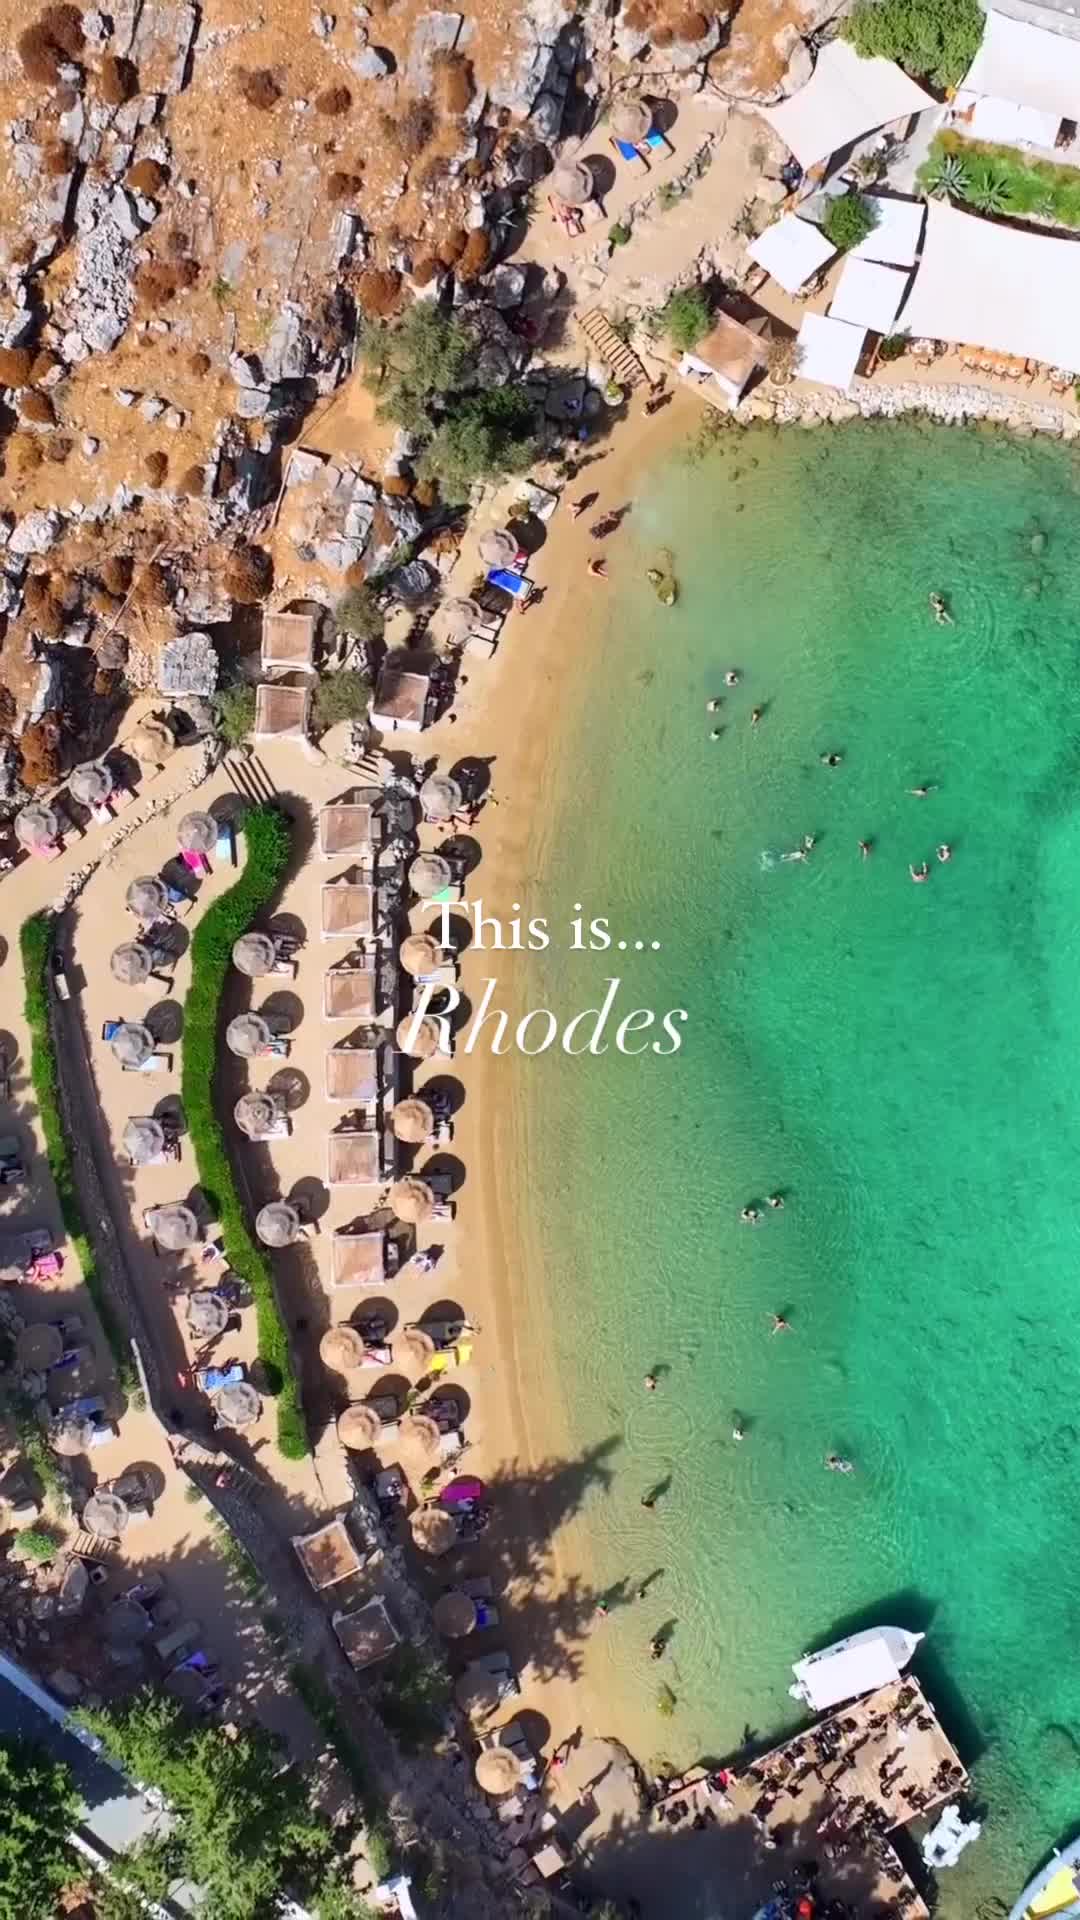 If you are watching this reel means that you need to go to Rhodes next summer 🇬🇷✨. 
Tag someone to bring here.
.
.
.
#rhodes #greece #greece🇬🇷 #visitgreece #grecia #beautifuldestinations #vacations  #resortmagazine  #drone #beach #weekend #sunday #wonderfulplaces #wonderful_places #voyaged #wu_greece